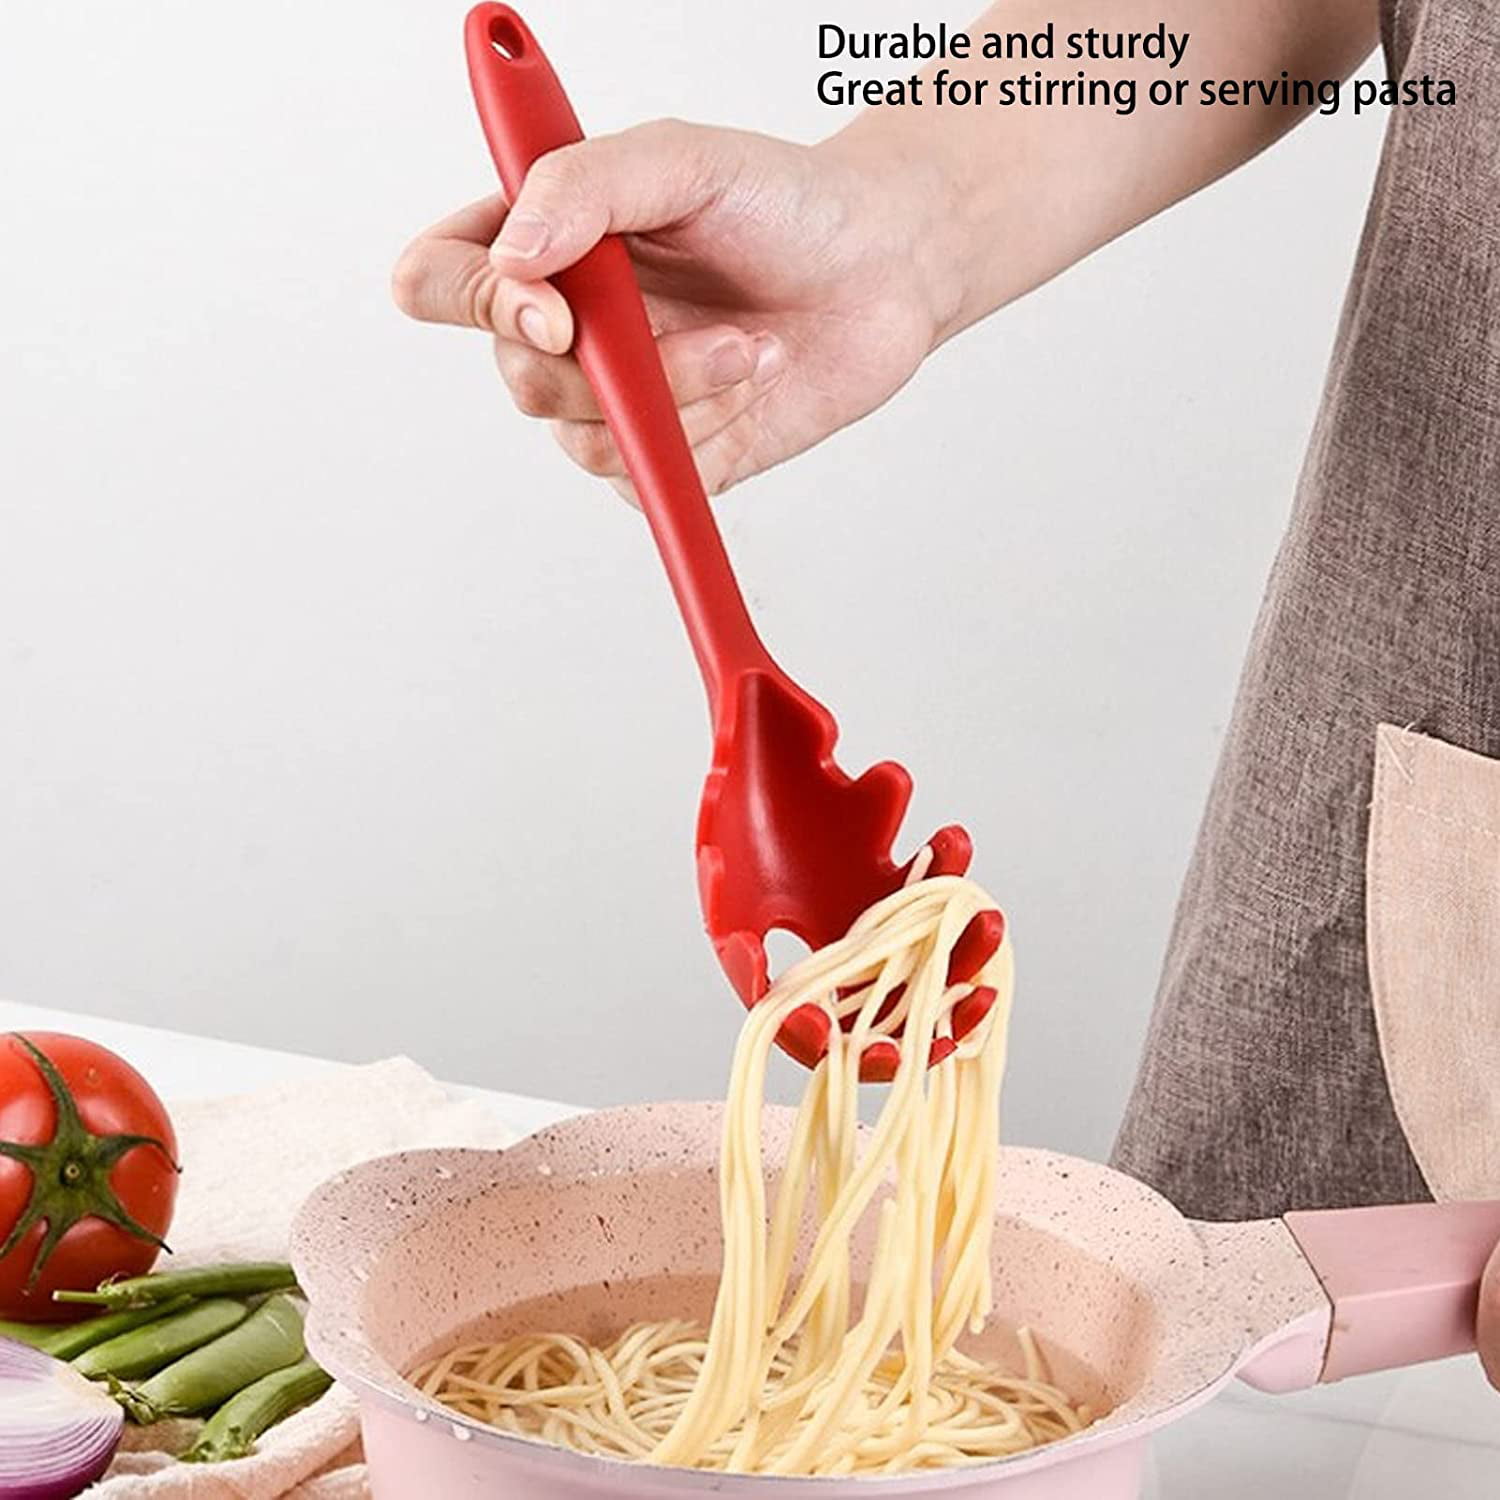 3-in-1 Shark Kitchen Tool is a spaghetti measure, silicone mitt, spoon rest